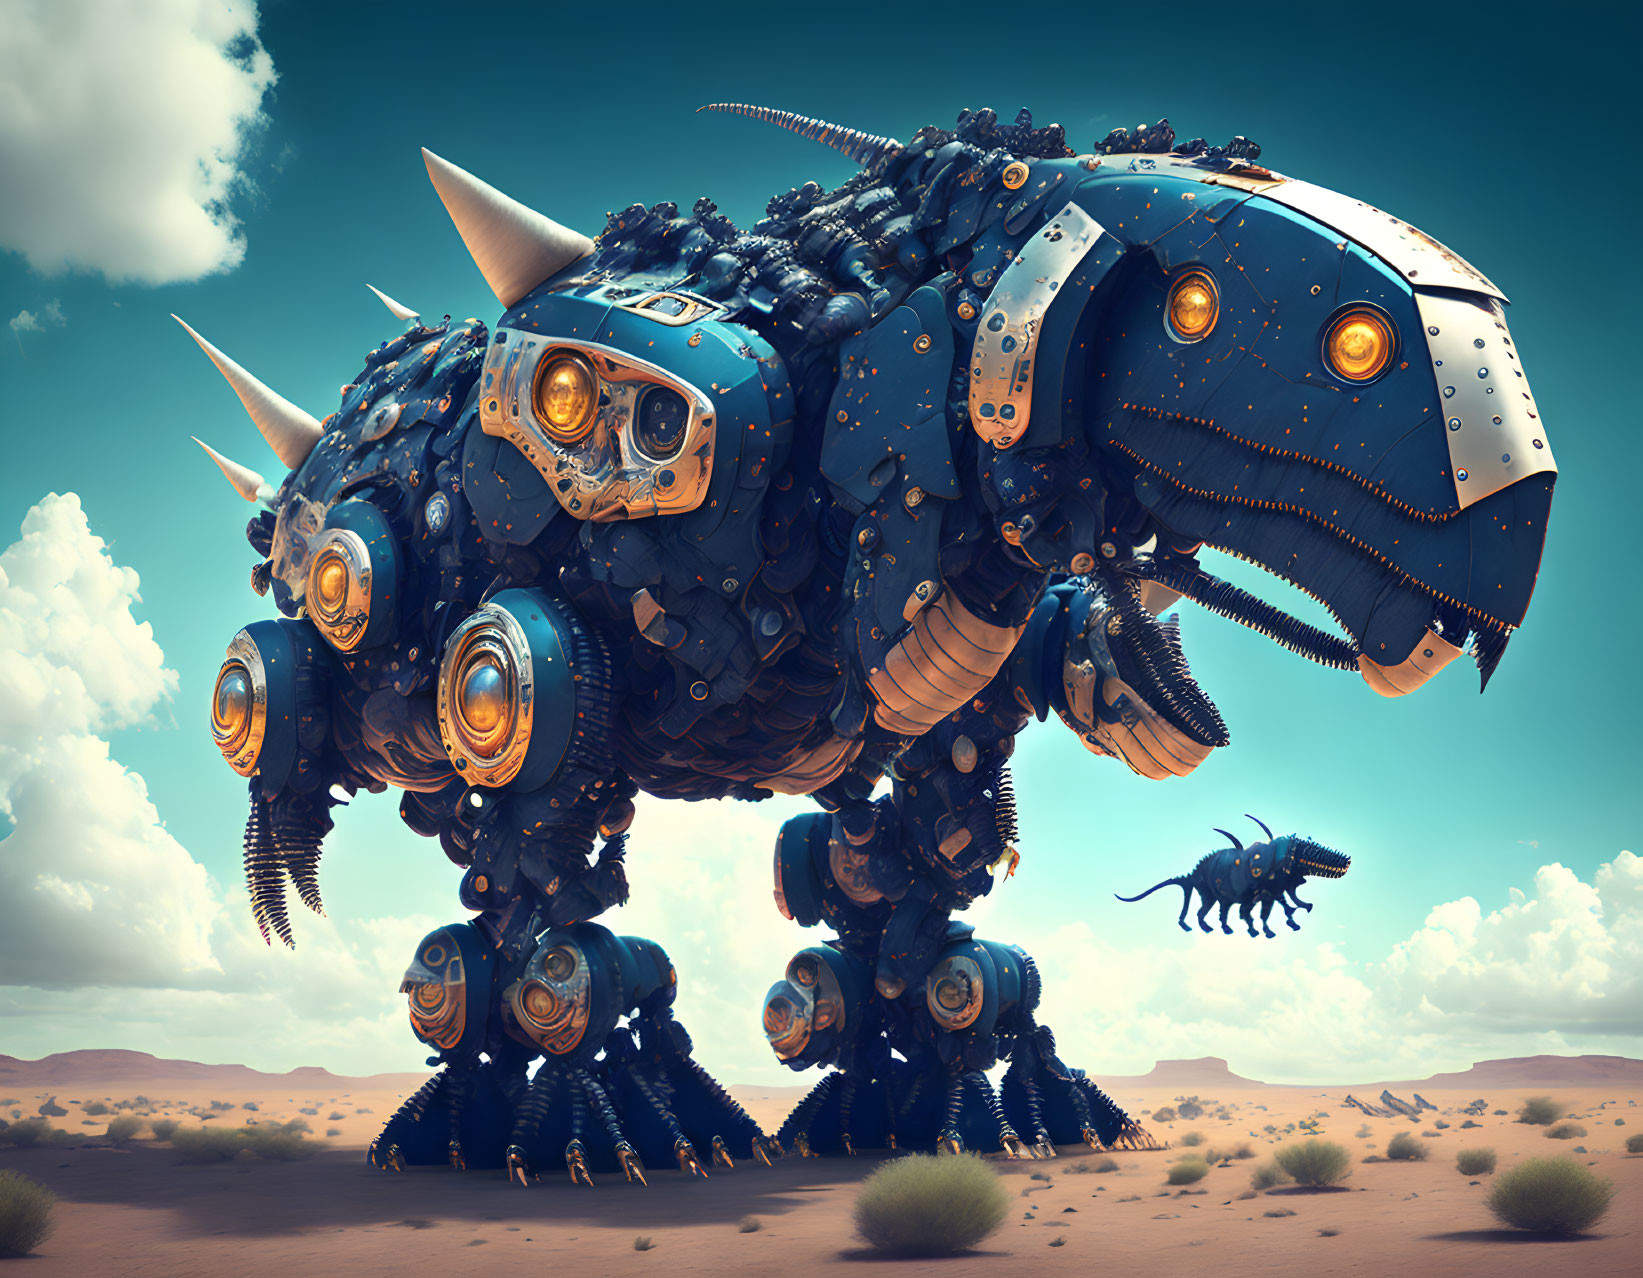 Intricate mechanical rhinoceros in desert with flying robotic insects